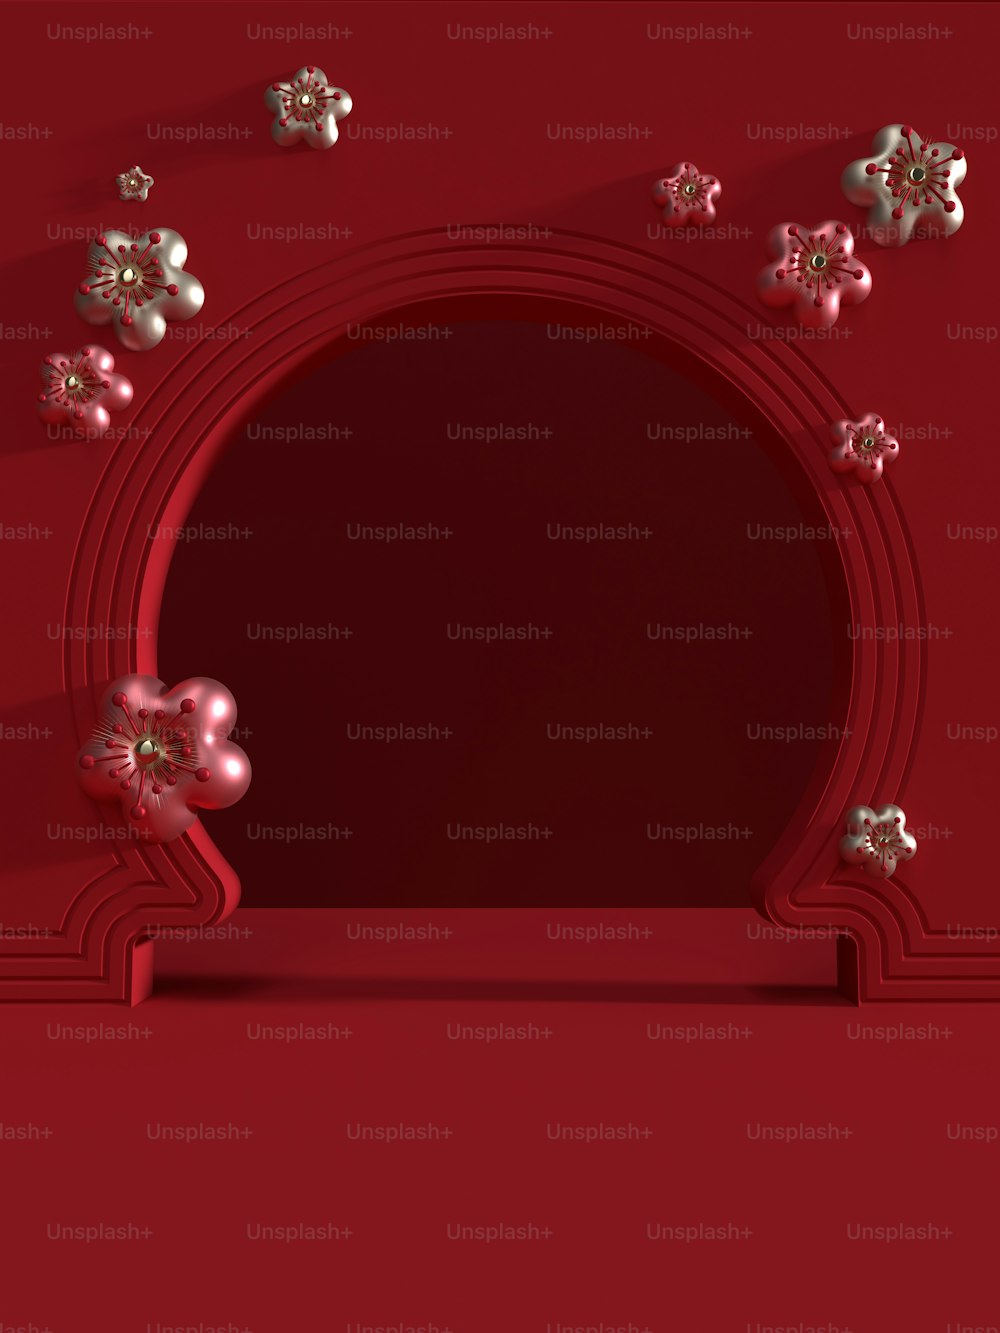 a red background with a red arch and flowers